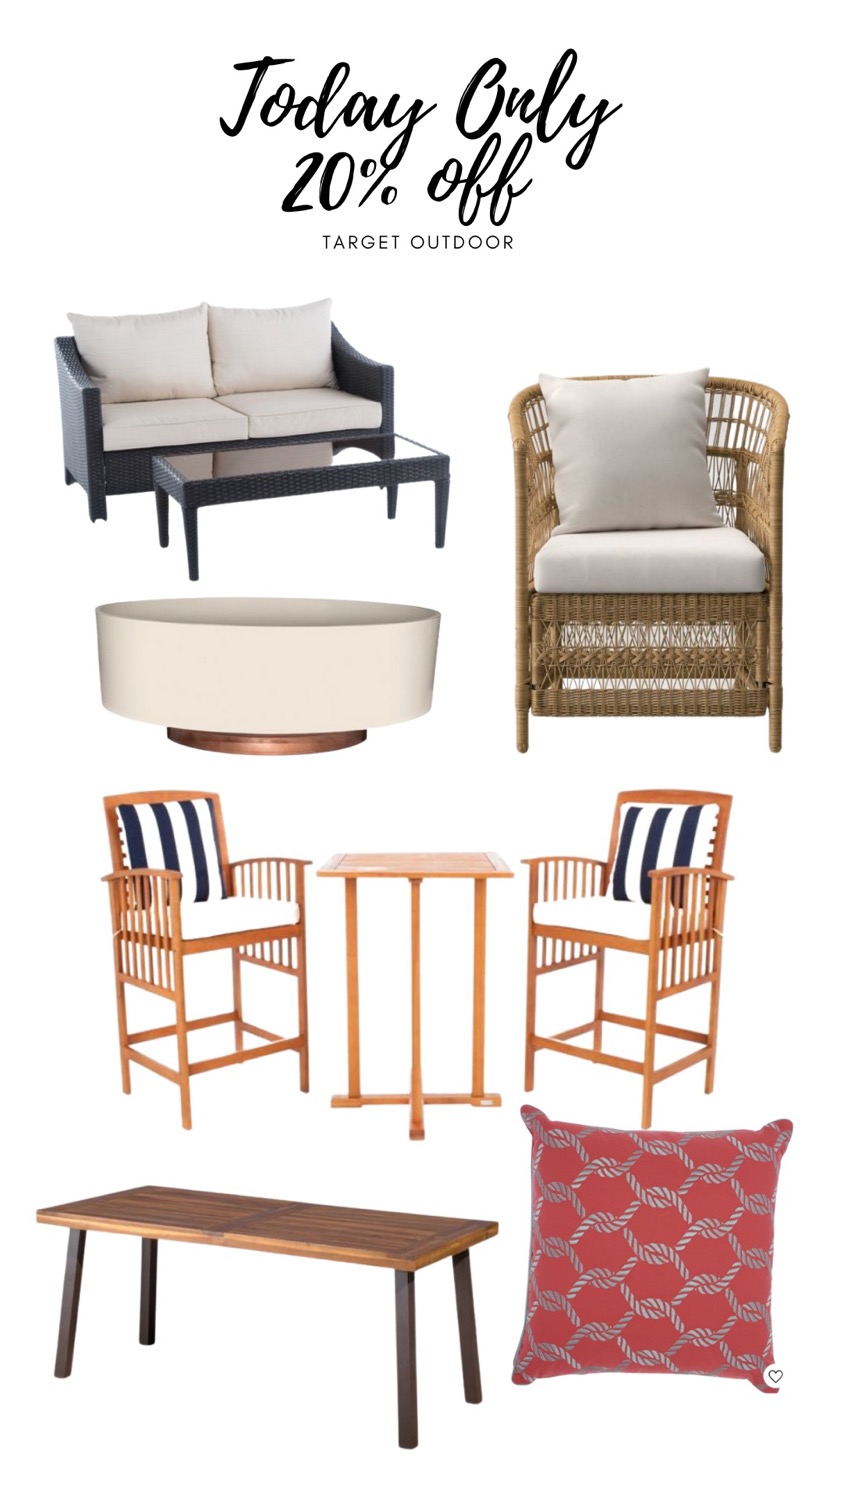 Target Outdoor Sale – 20% Off Today Only!